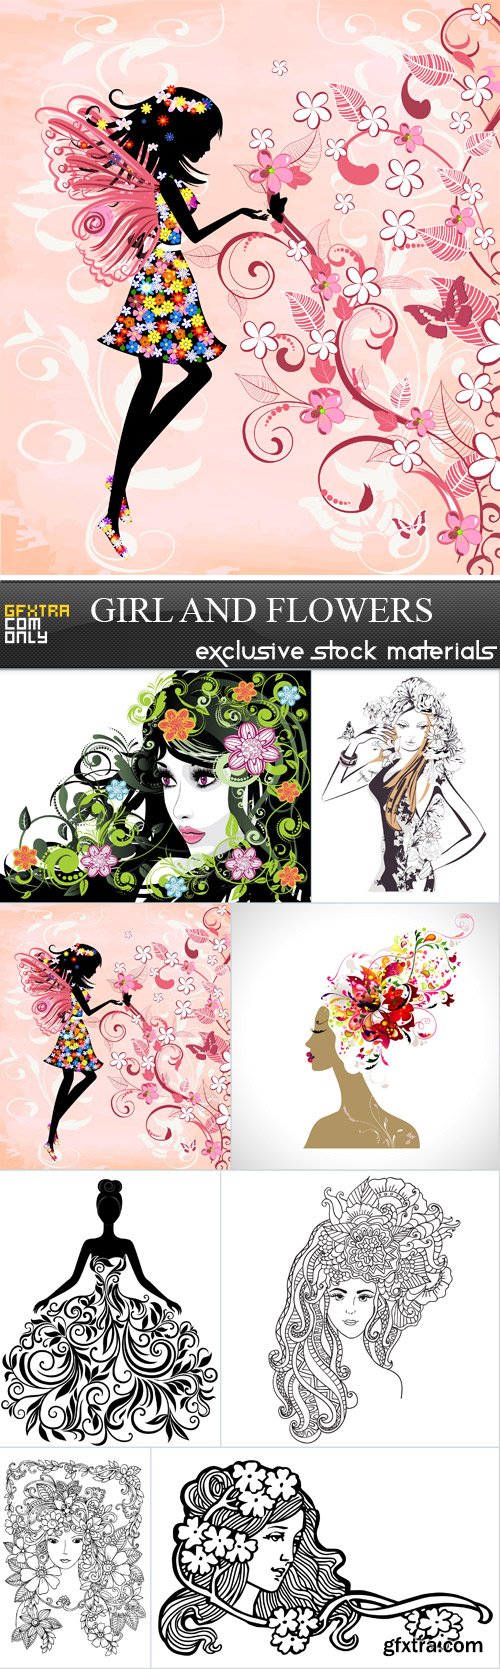 girl and flowers - 8 EPS